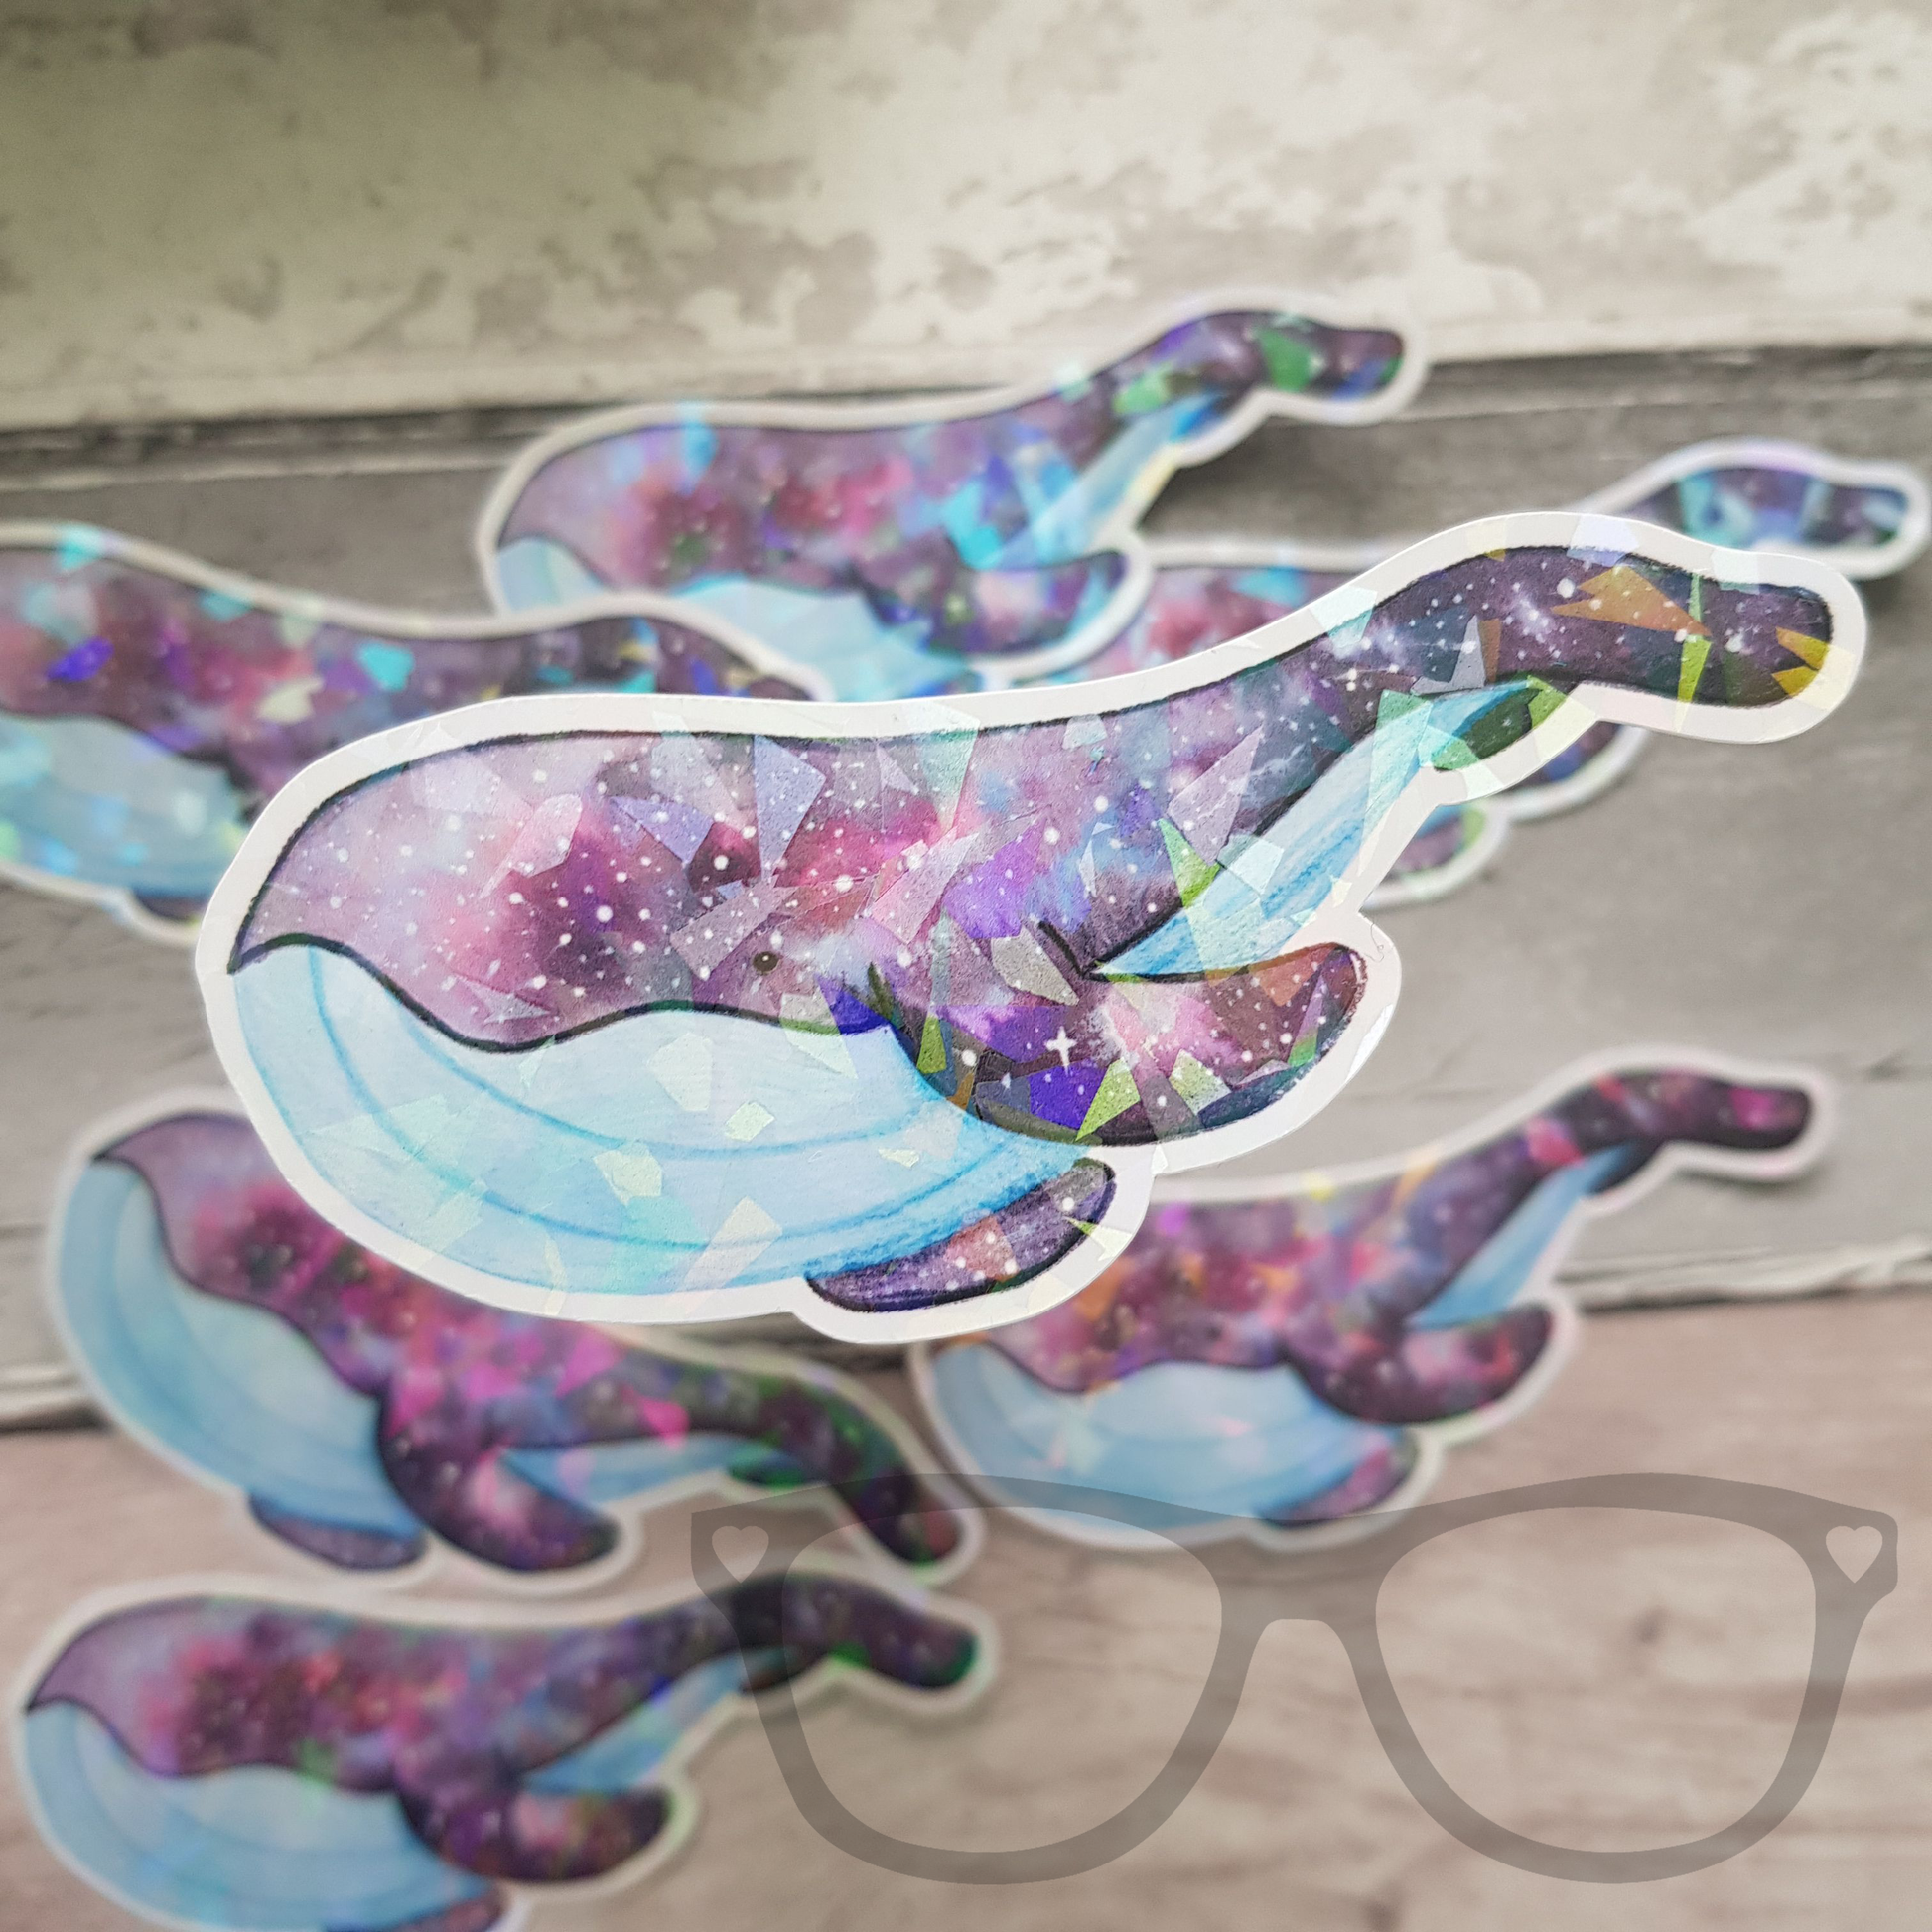 Space Whale vinyl sticker with sparkly overlay